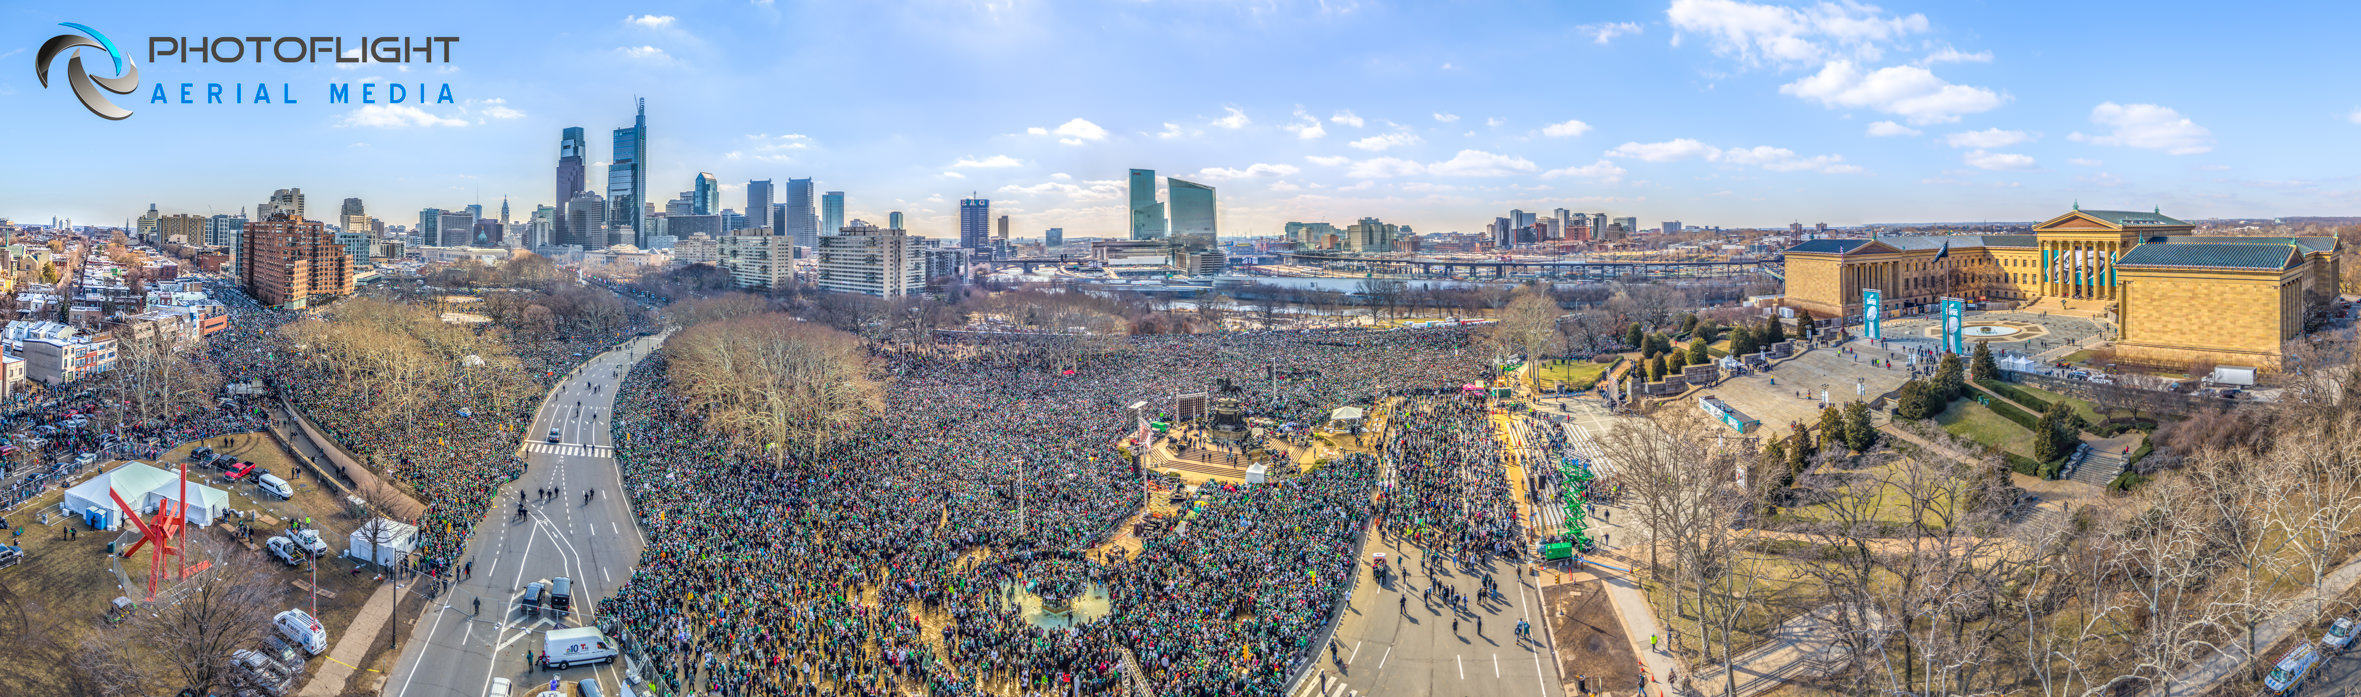 Eagles 2018 Super Bowl Victory Parade PA drone photography